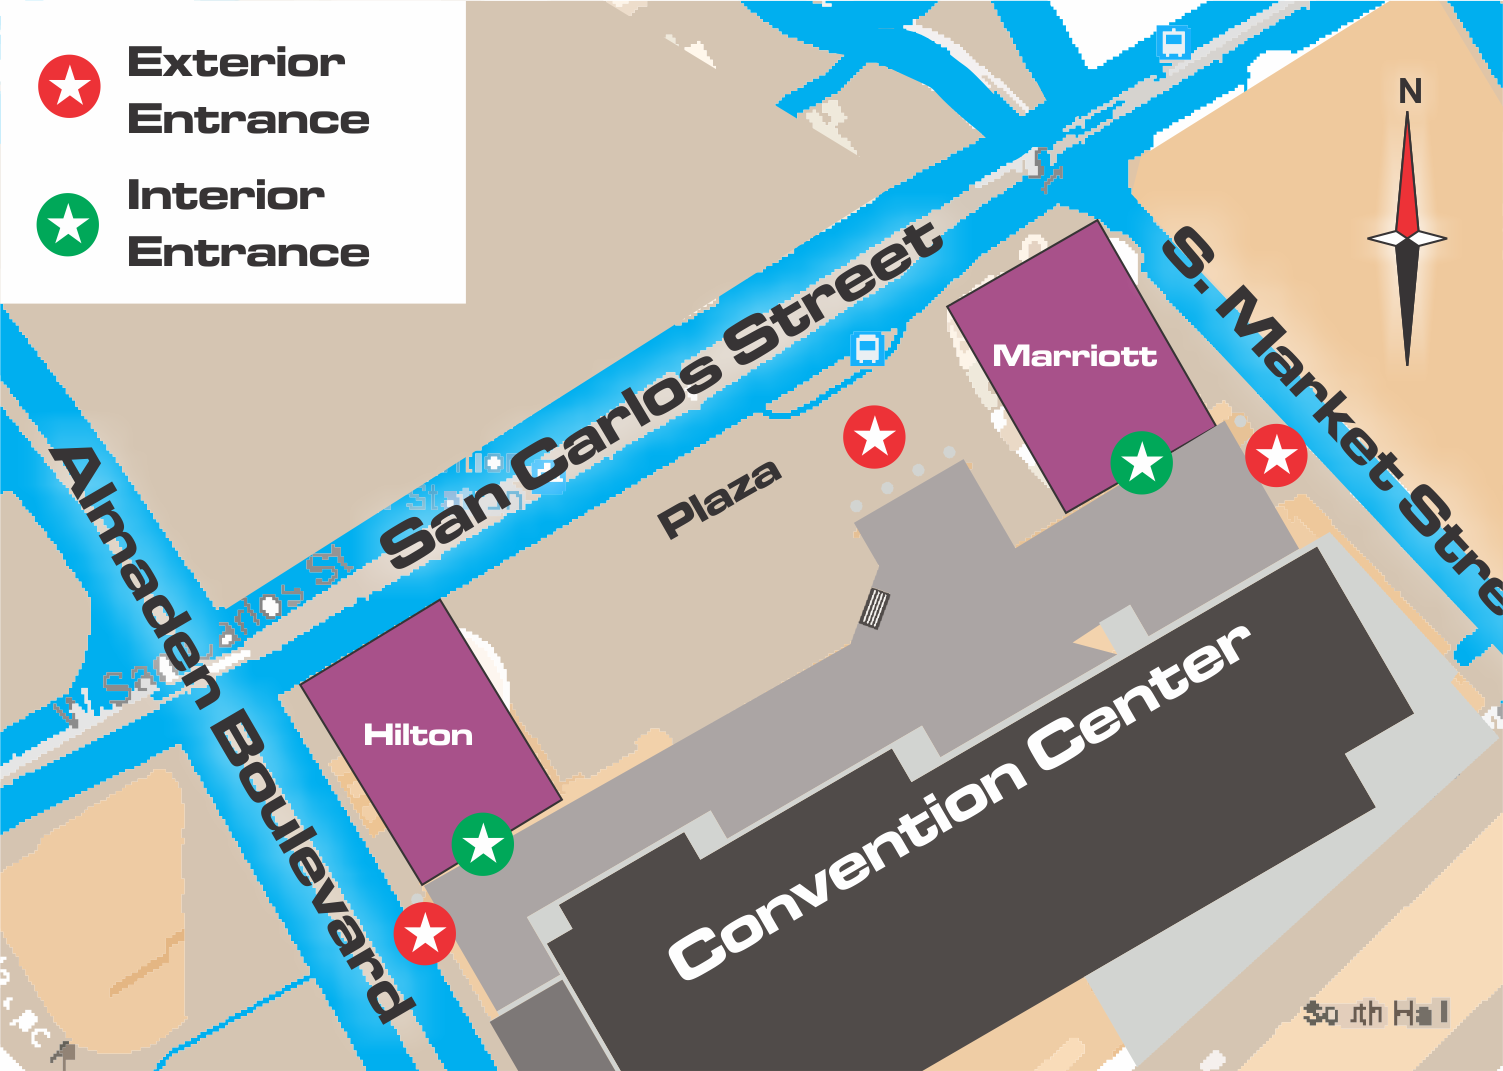 Simple street map of Convention Center location